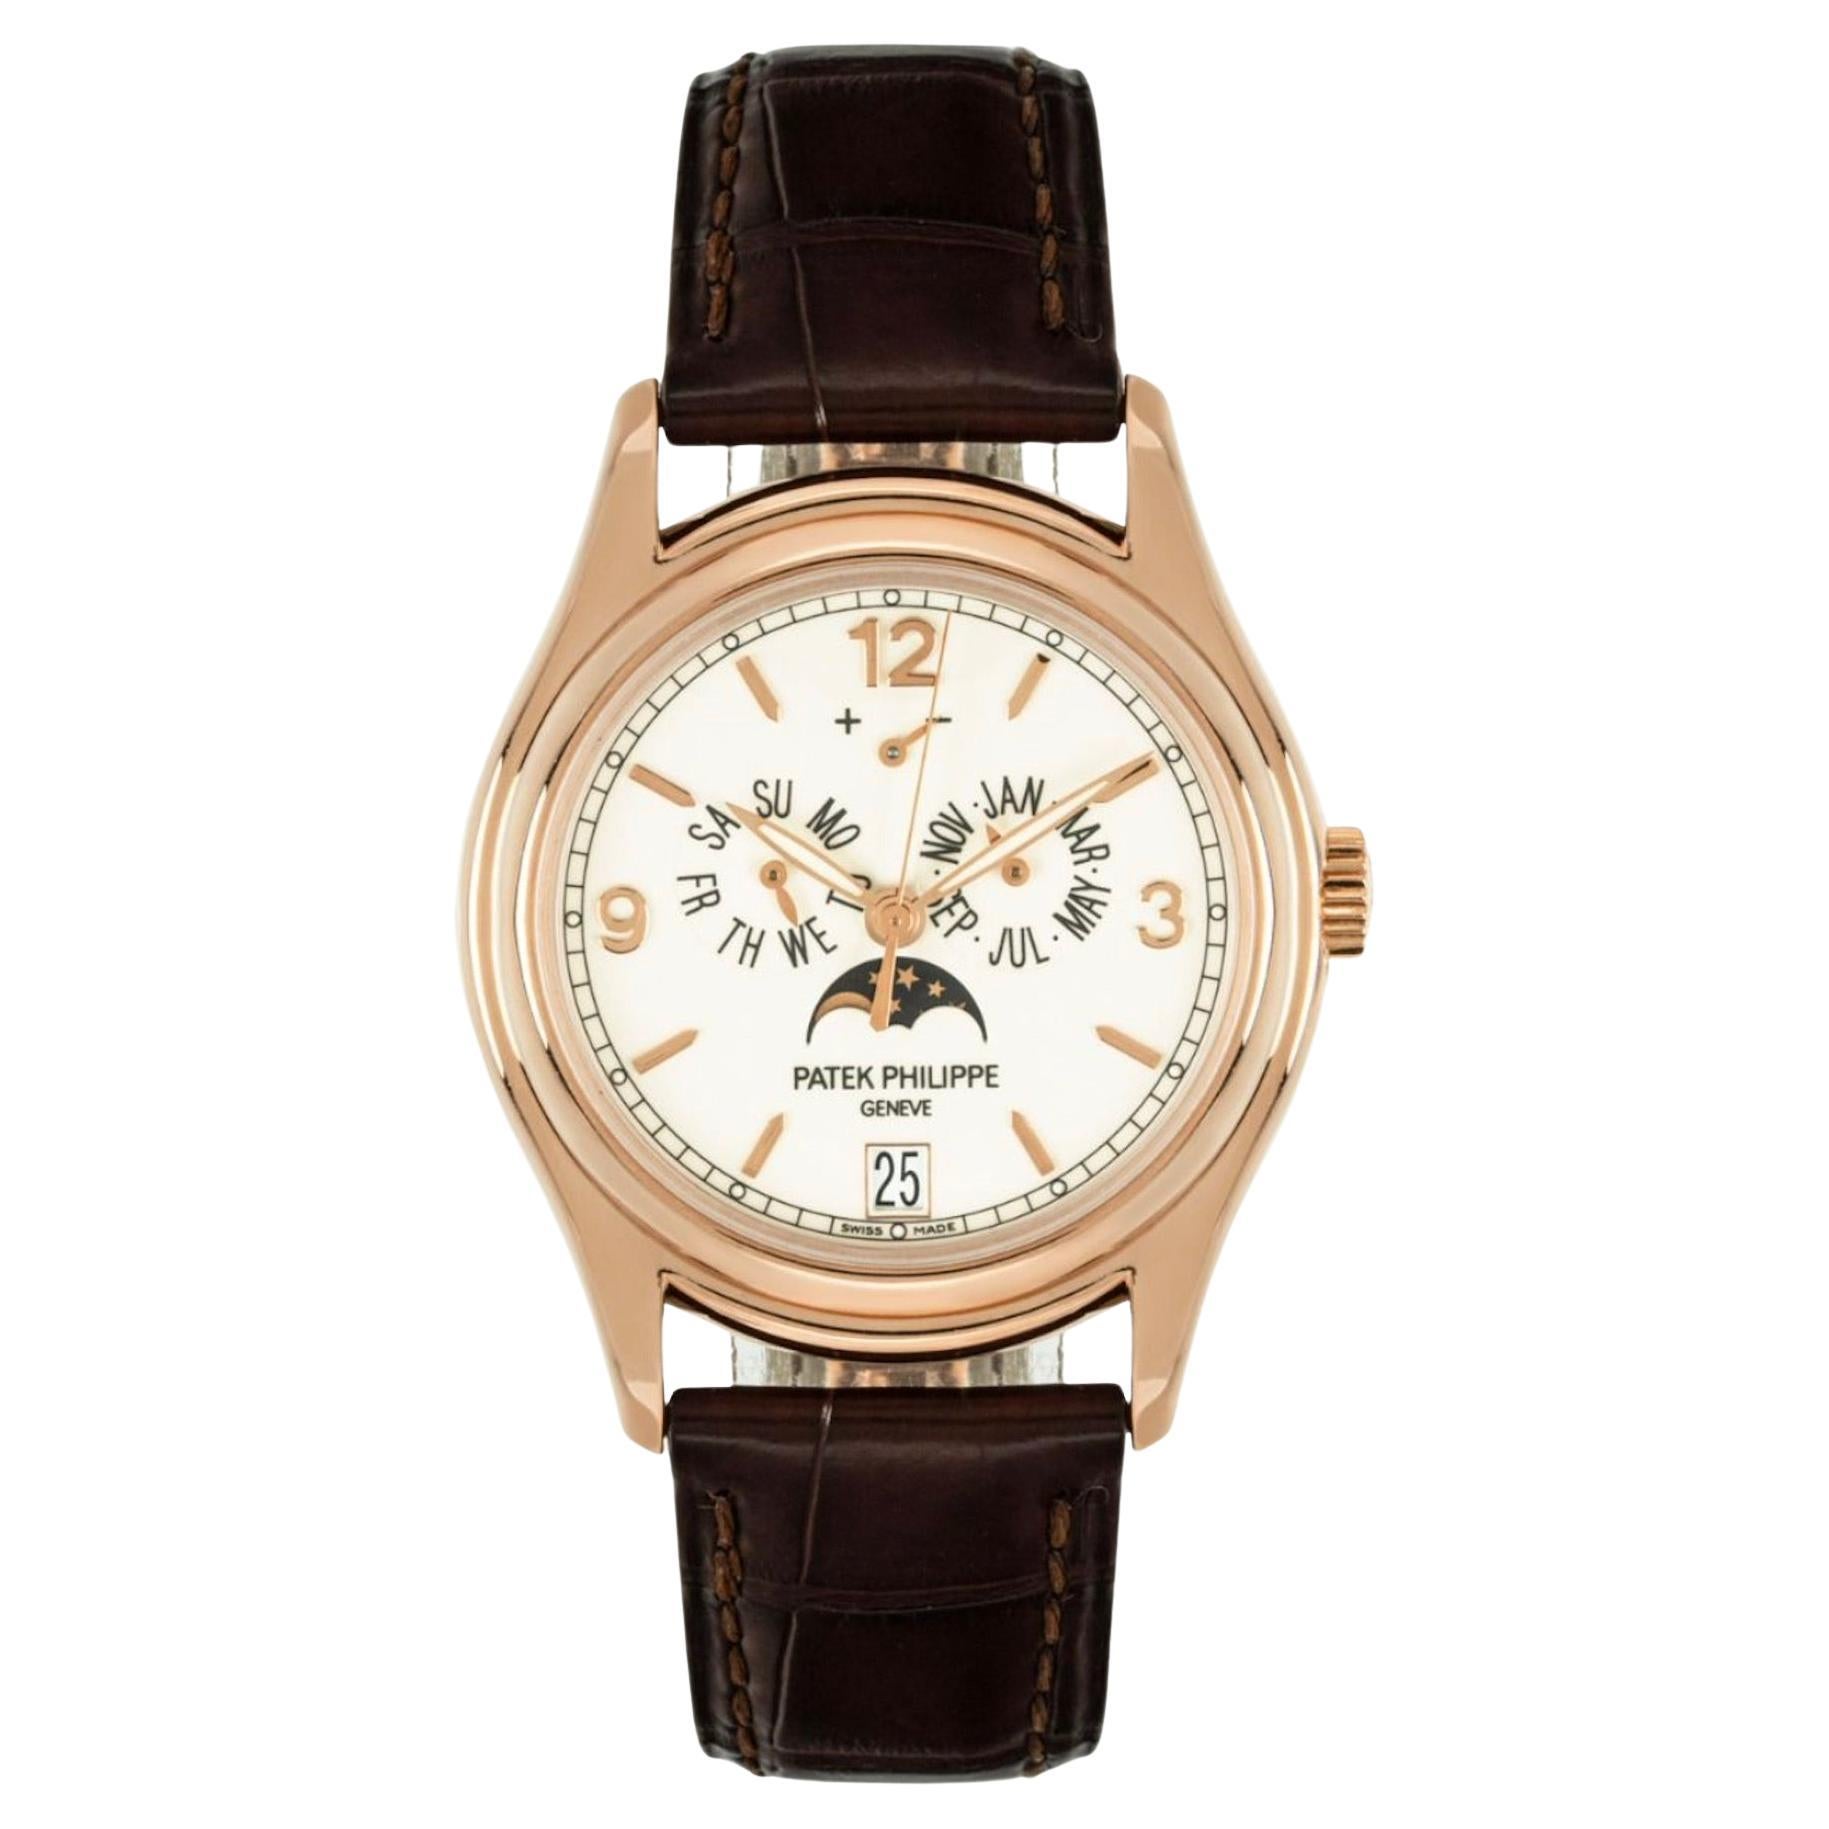 An Annual Calendar crafted in rose gold by Patek Philippe. Featuring a cream dial with displays of the day, date and month. The dial further features a moon phase display and a power reserve indicator.

The watch is presented on an original brown